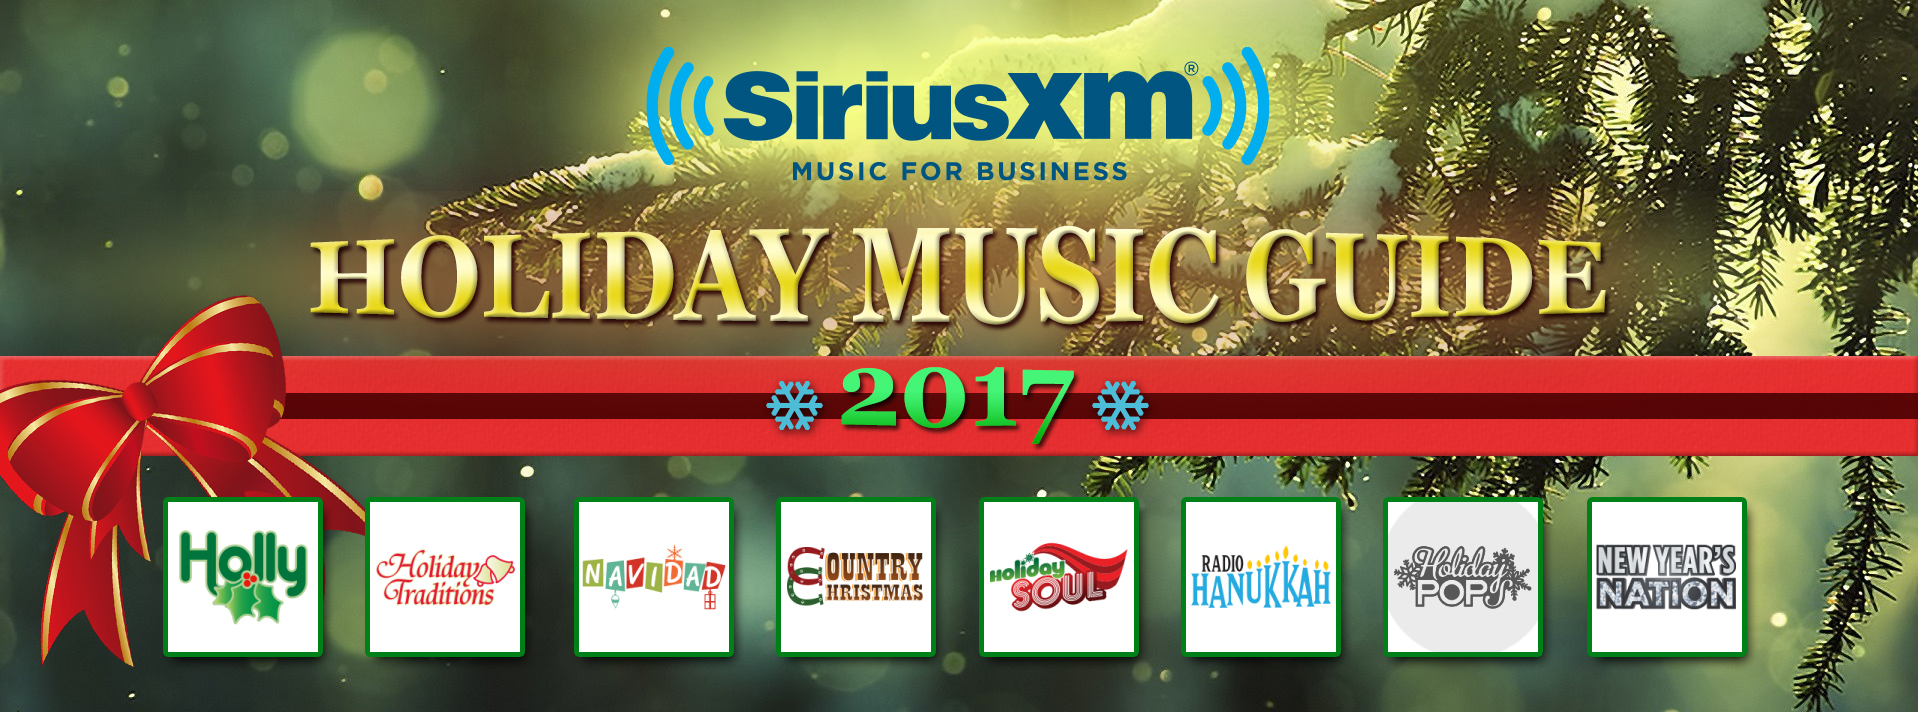 Holiday Music for Business - SiriusXM Holiday Music Guide for Businesses